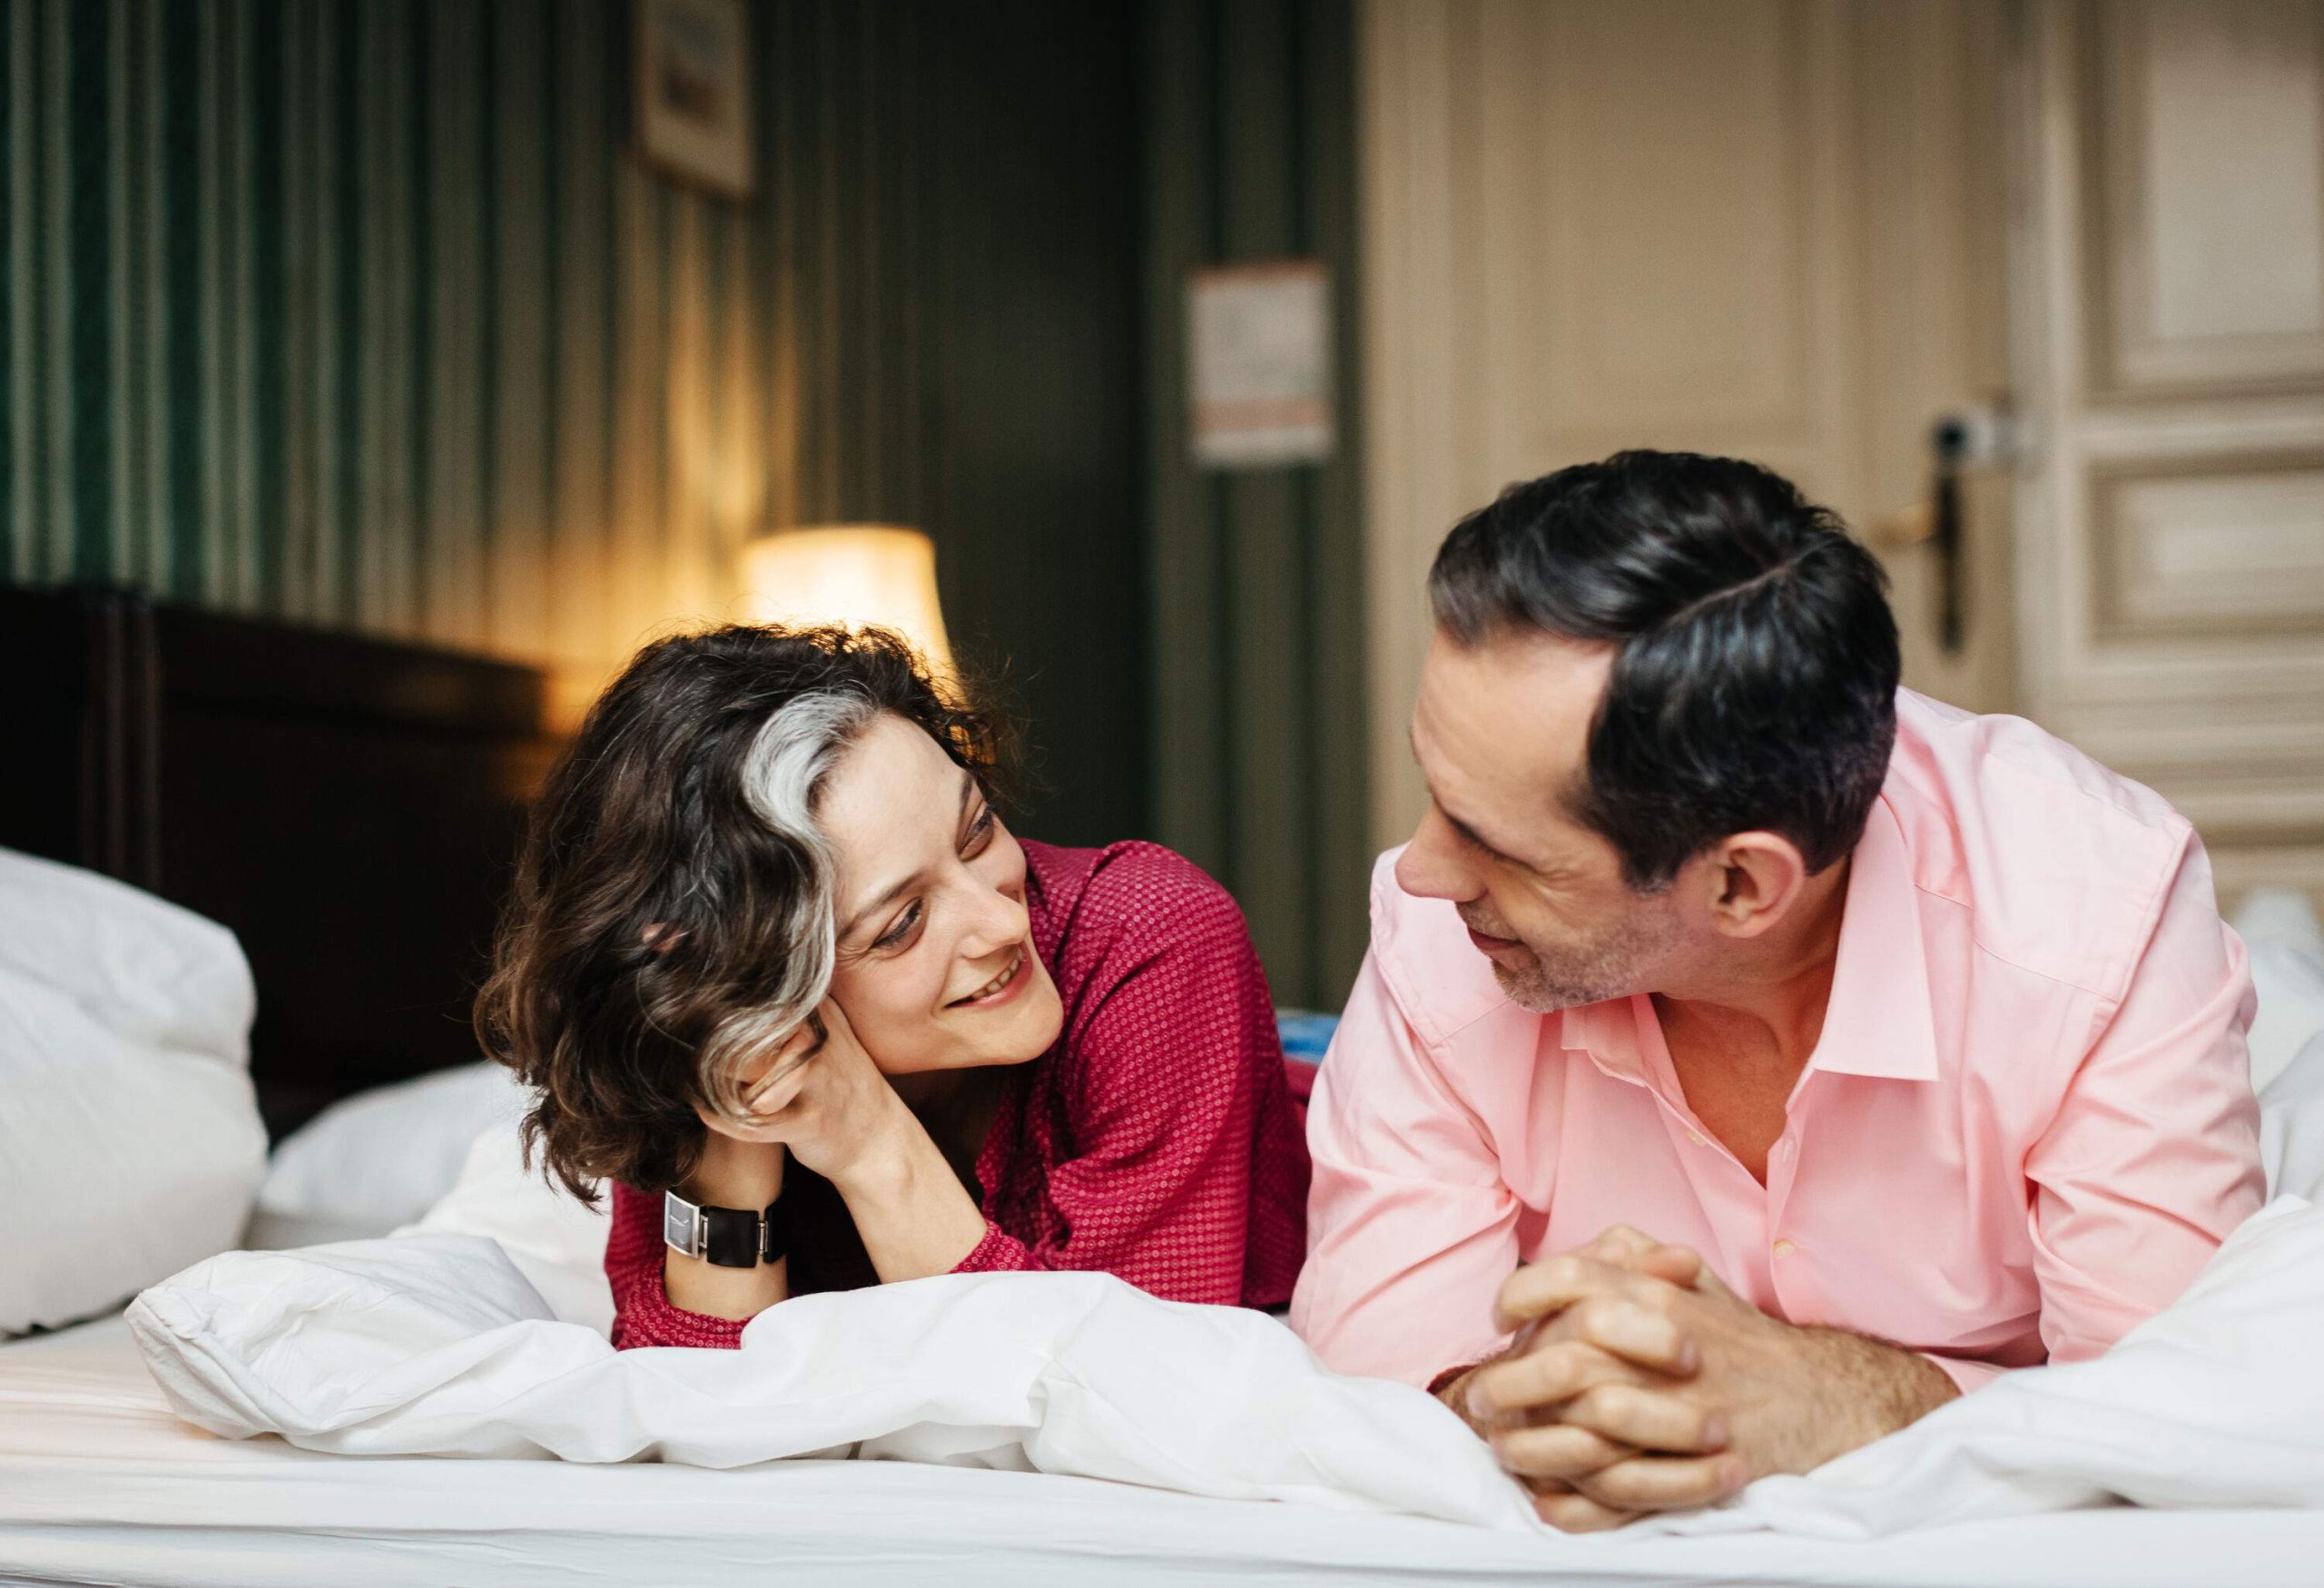 A mature, happy couple is lying at a hotel bed next to each other. They both are smiling and seem to be in love. In the background, the dark and green interior of the room can be seen.